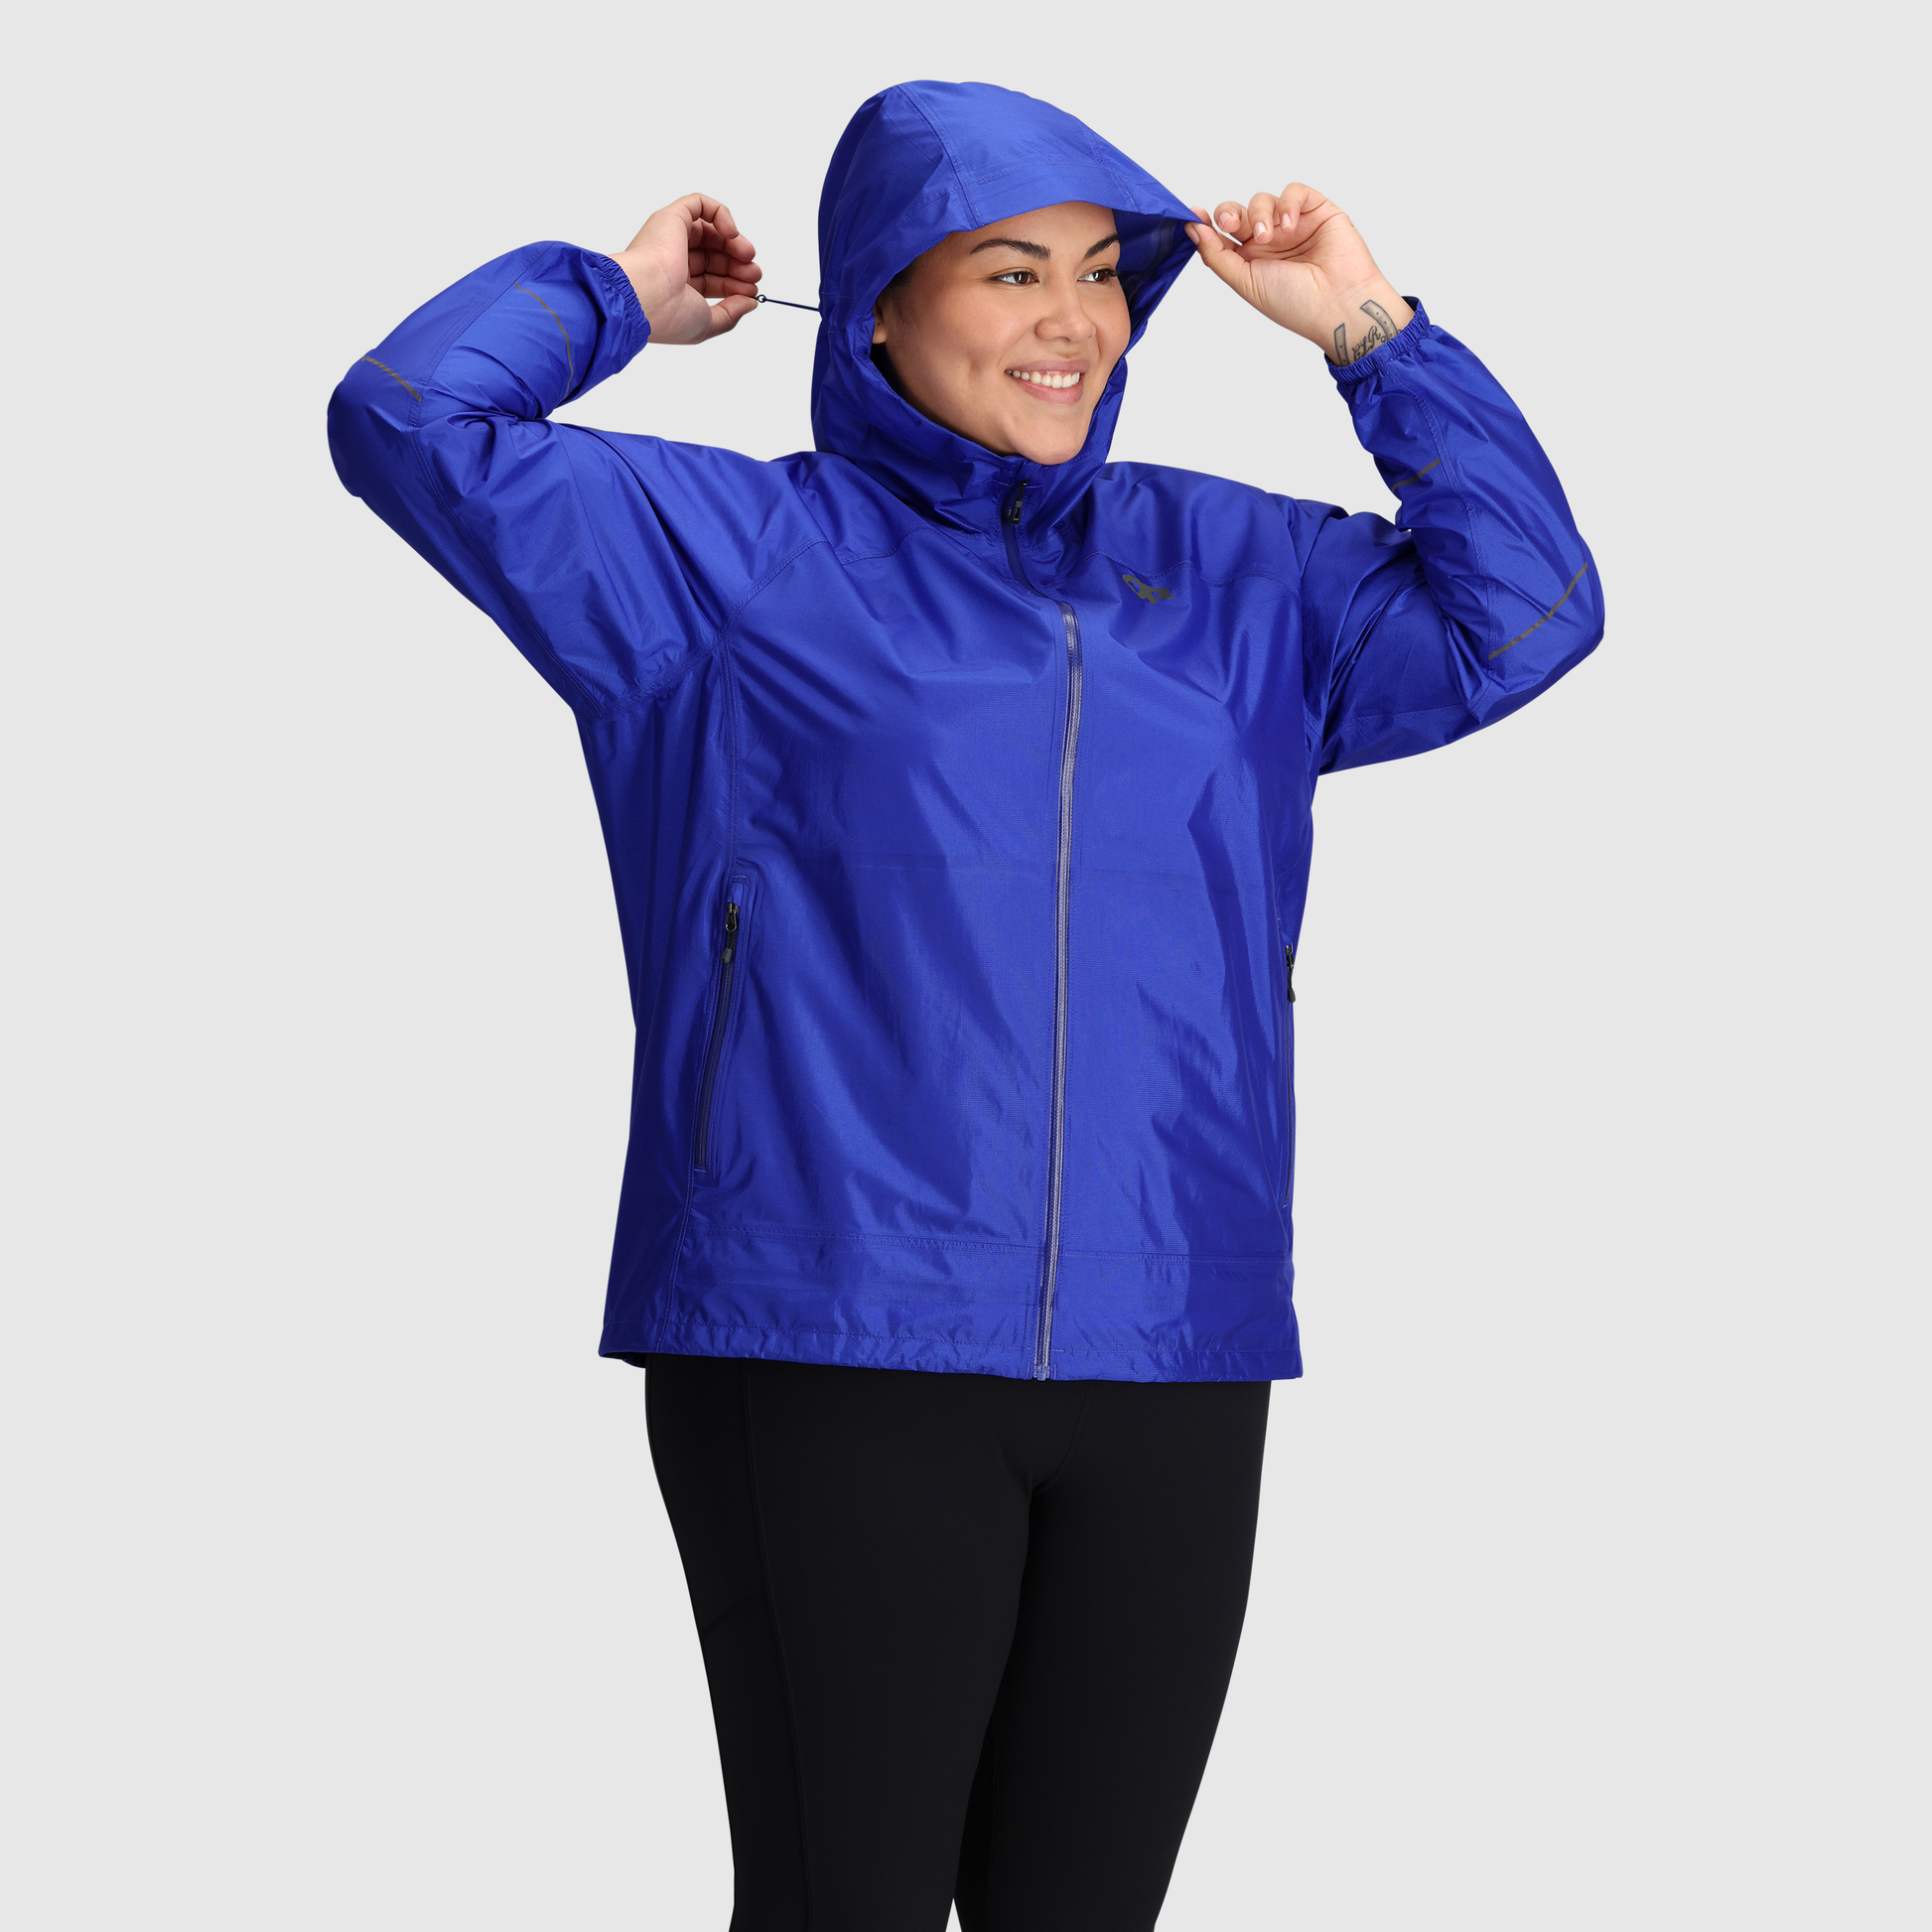 B4 :: Hood / Hold in warmth and keep out weather with this essential hood.